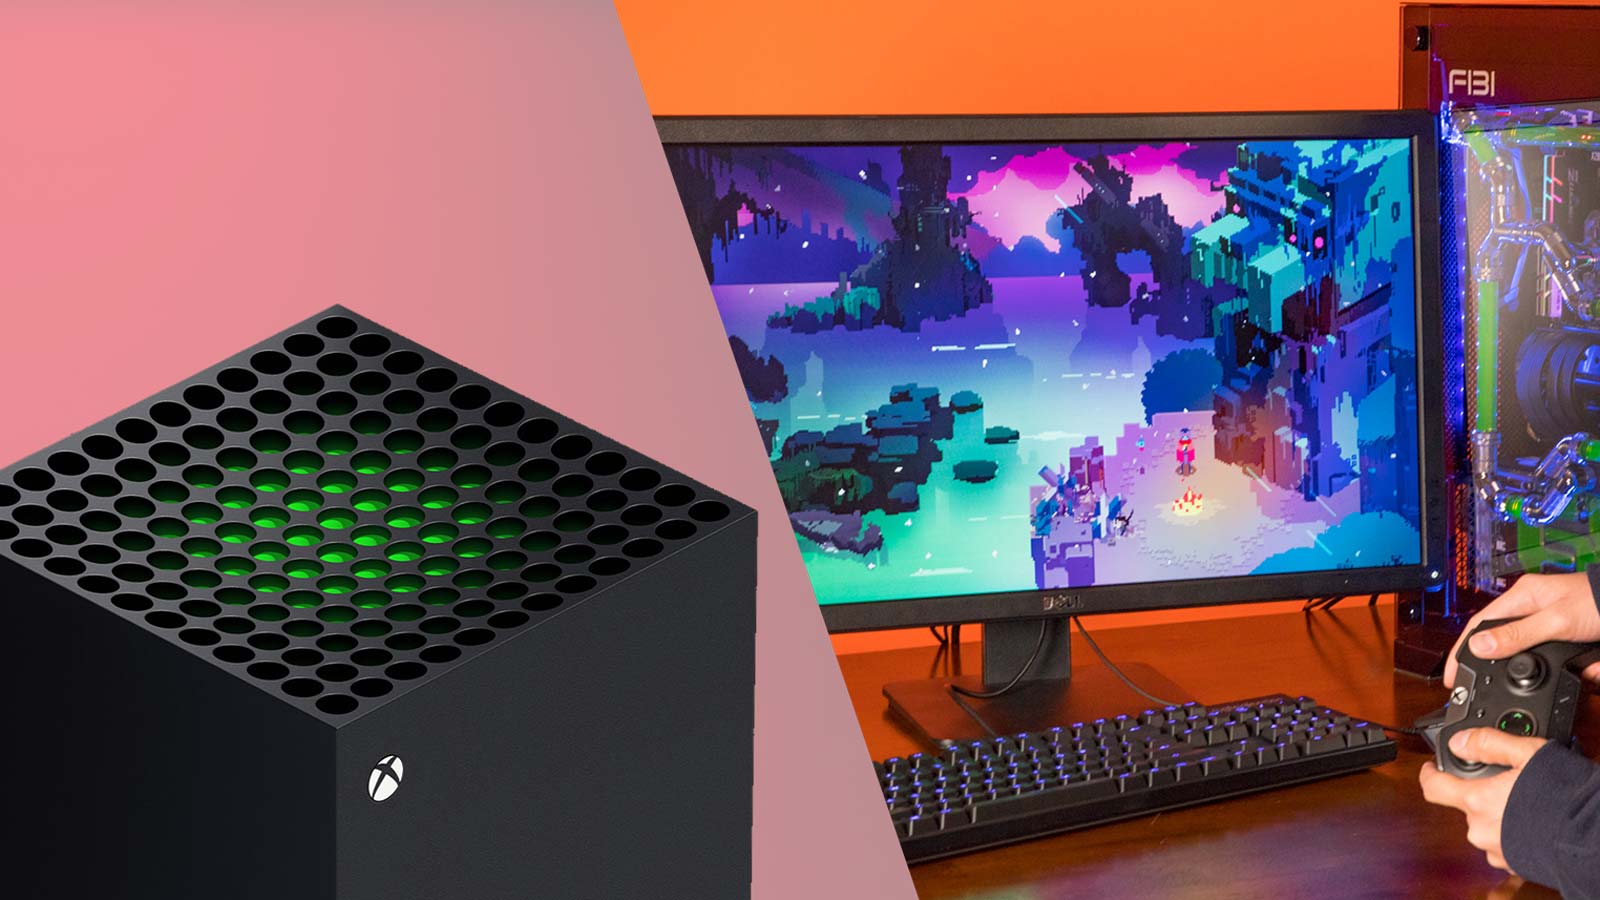 Xbox One X review: A console that keeps up with gaming PCs